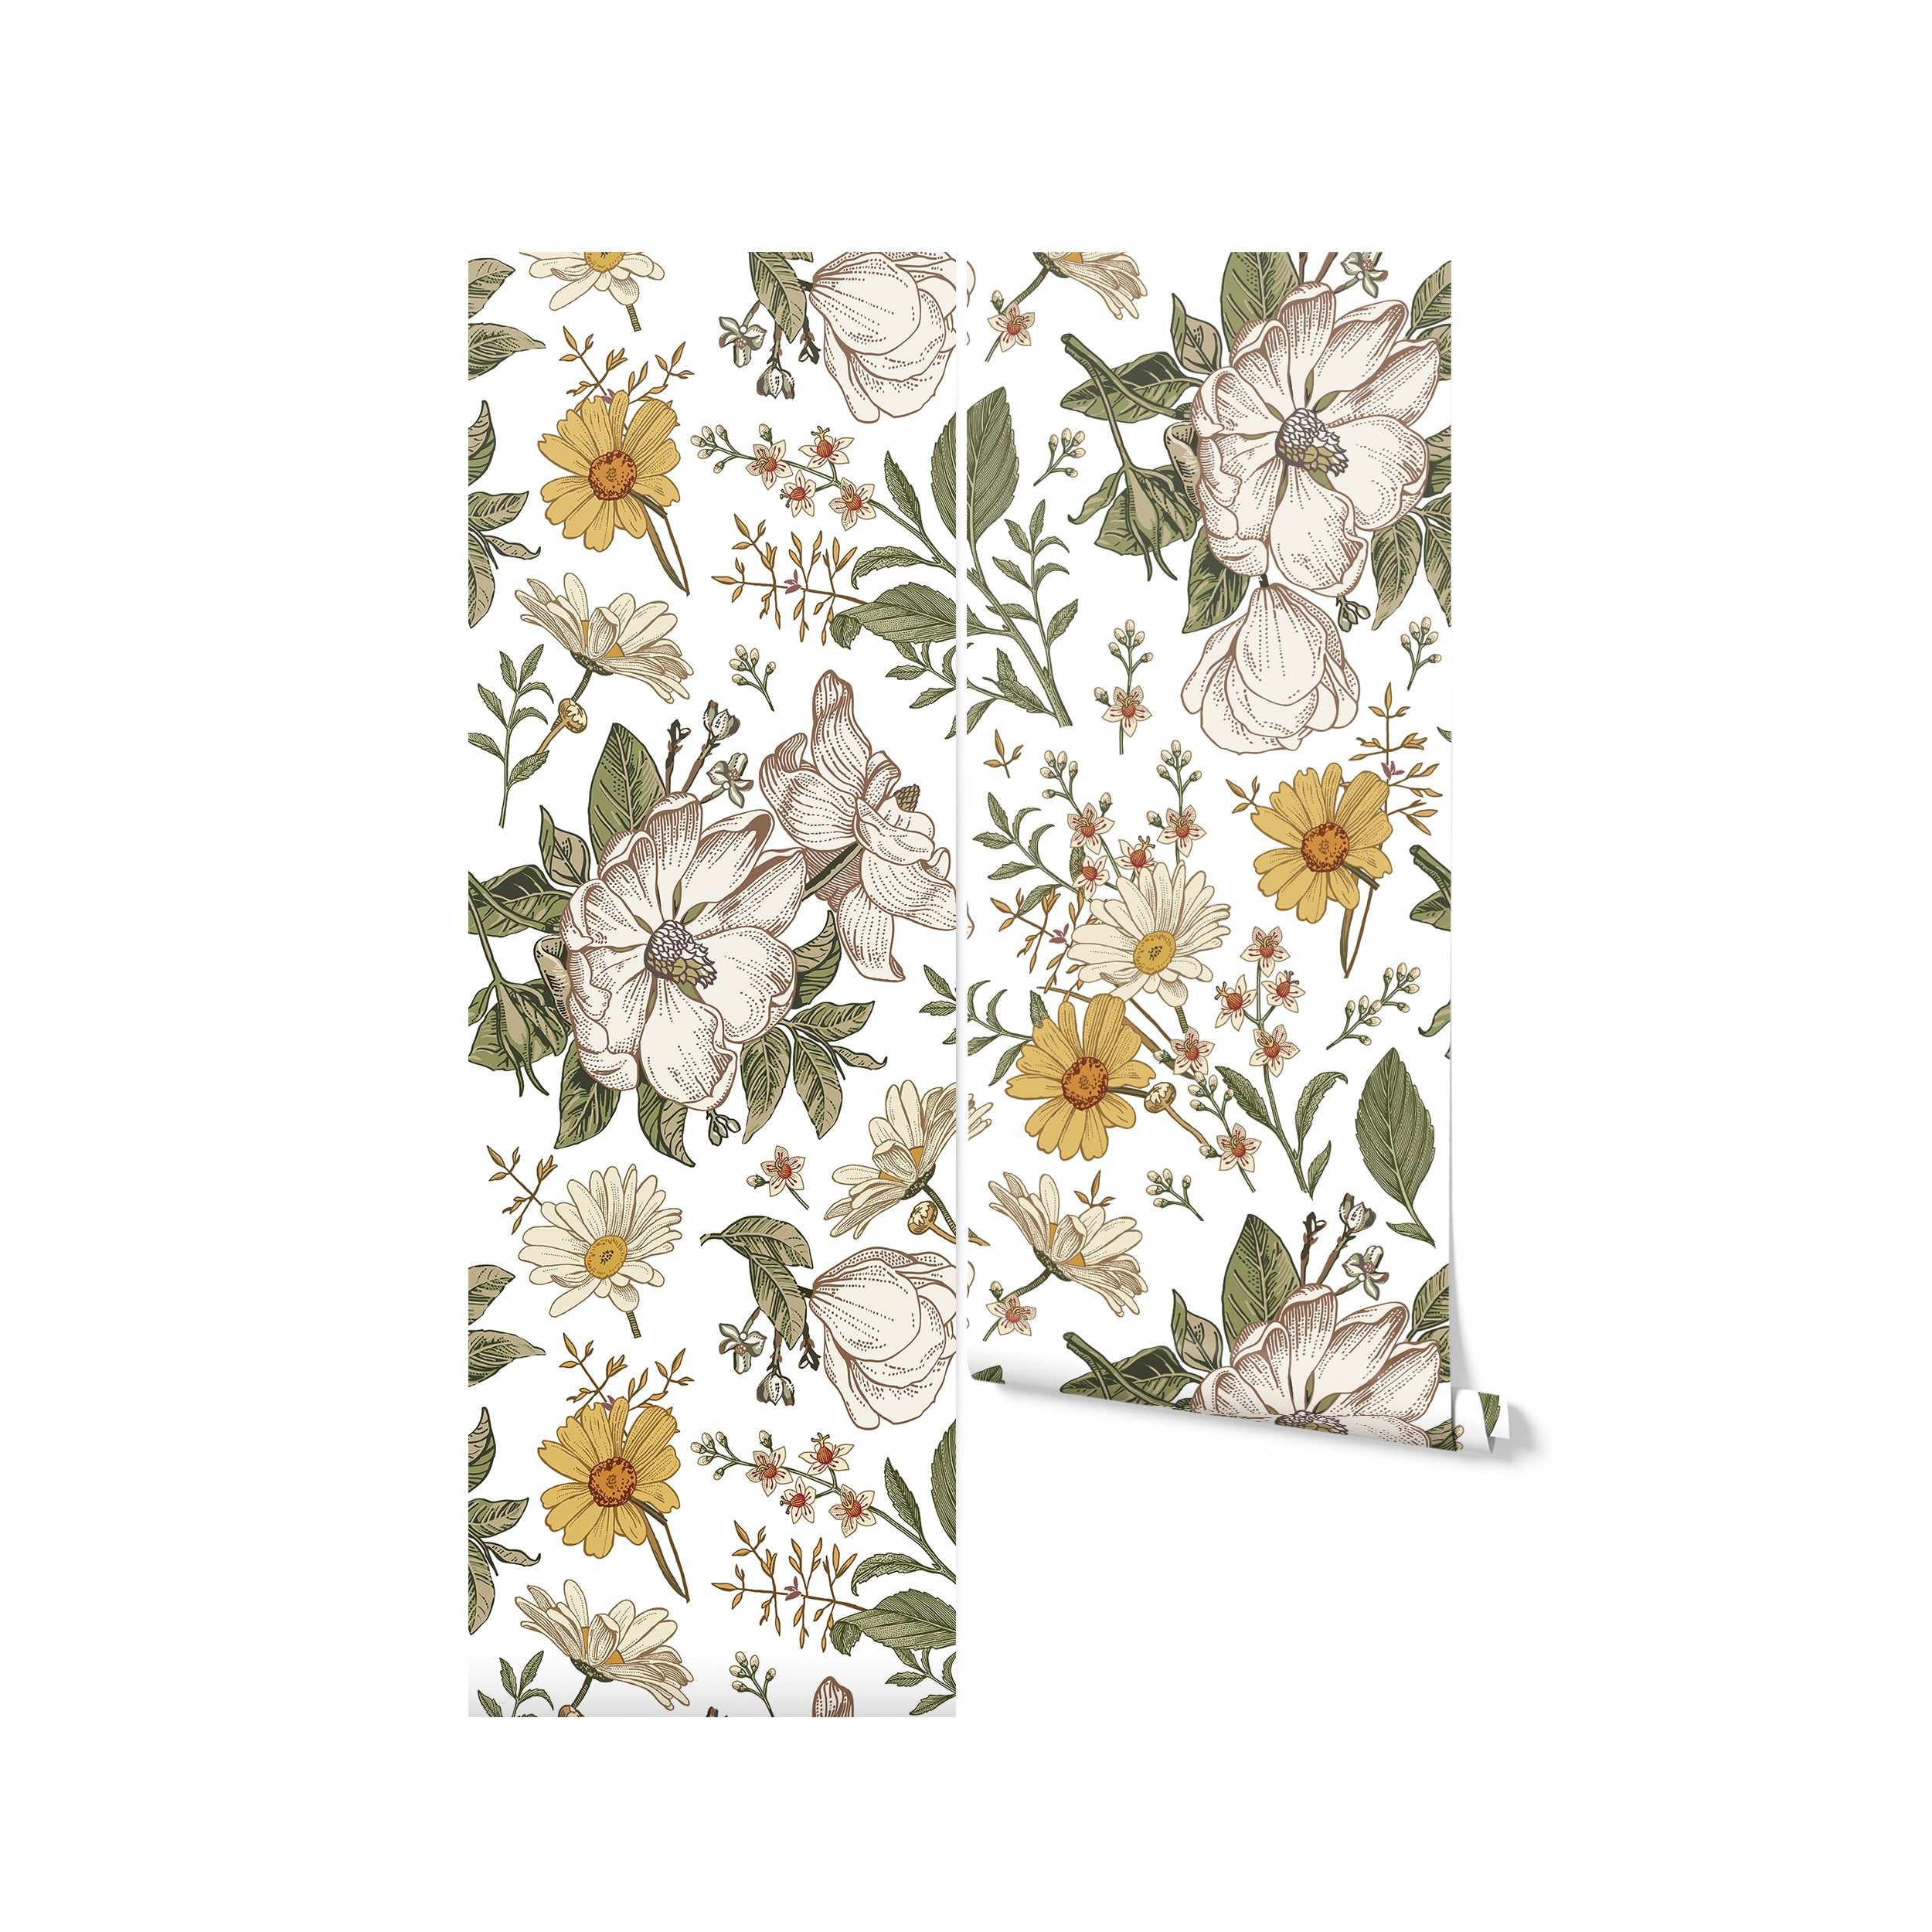 a roll of the "Floral Wallpaper - Sunny II." The image shows the wallpaper's detailed floral pattern with prominent blooms and foliage in cheerful hues, ready to transform any room into a bright and inviting space.